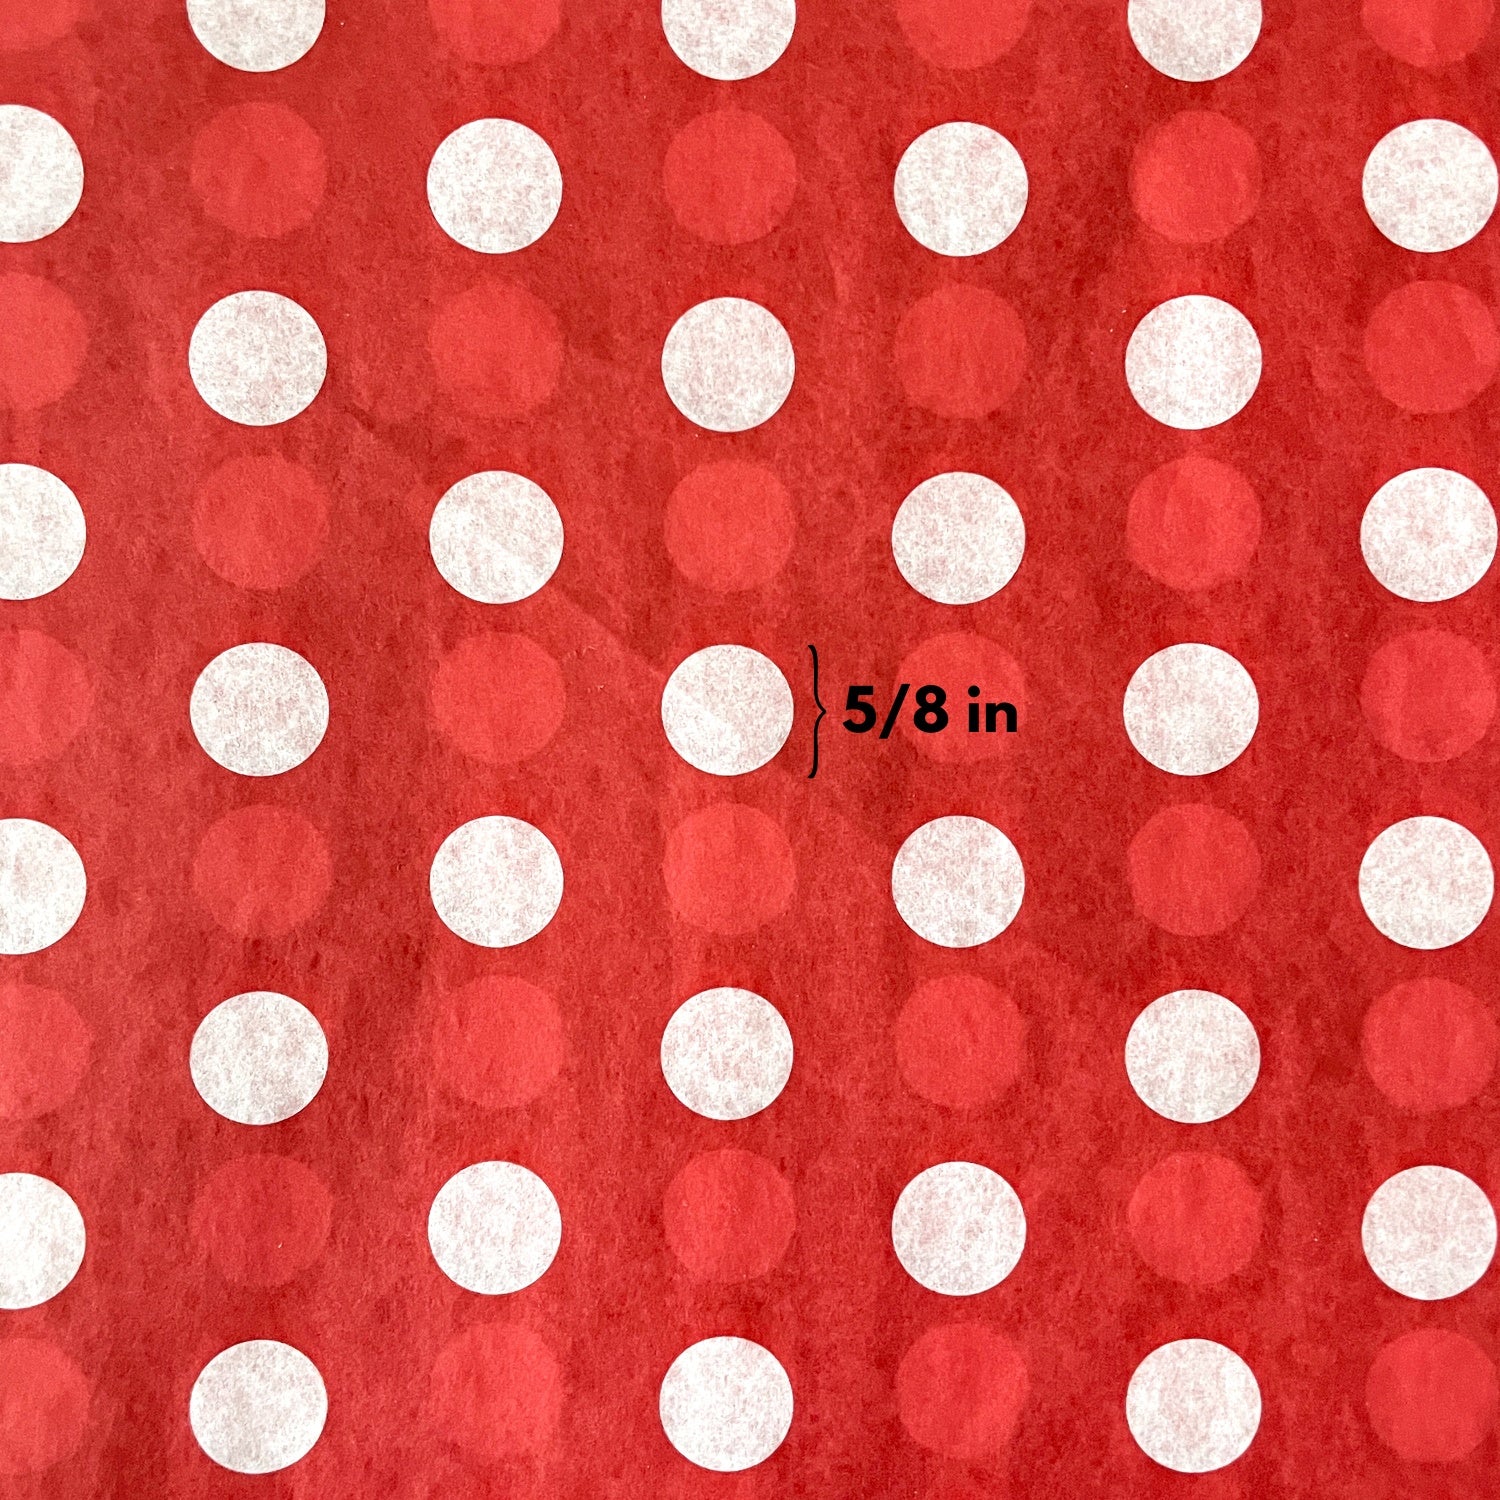 Red Polka Dots Patterned Tissue Paper - Gift Wrapping - Enchanted Woodland Mushroom Stationery Paper - Hand Craft Supplies